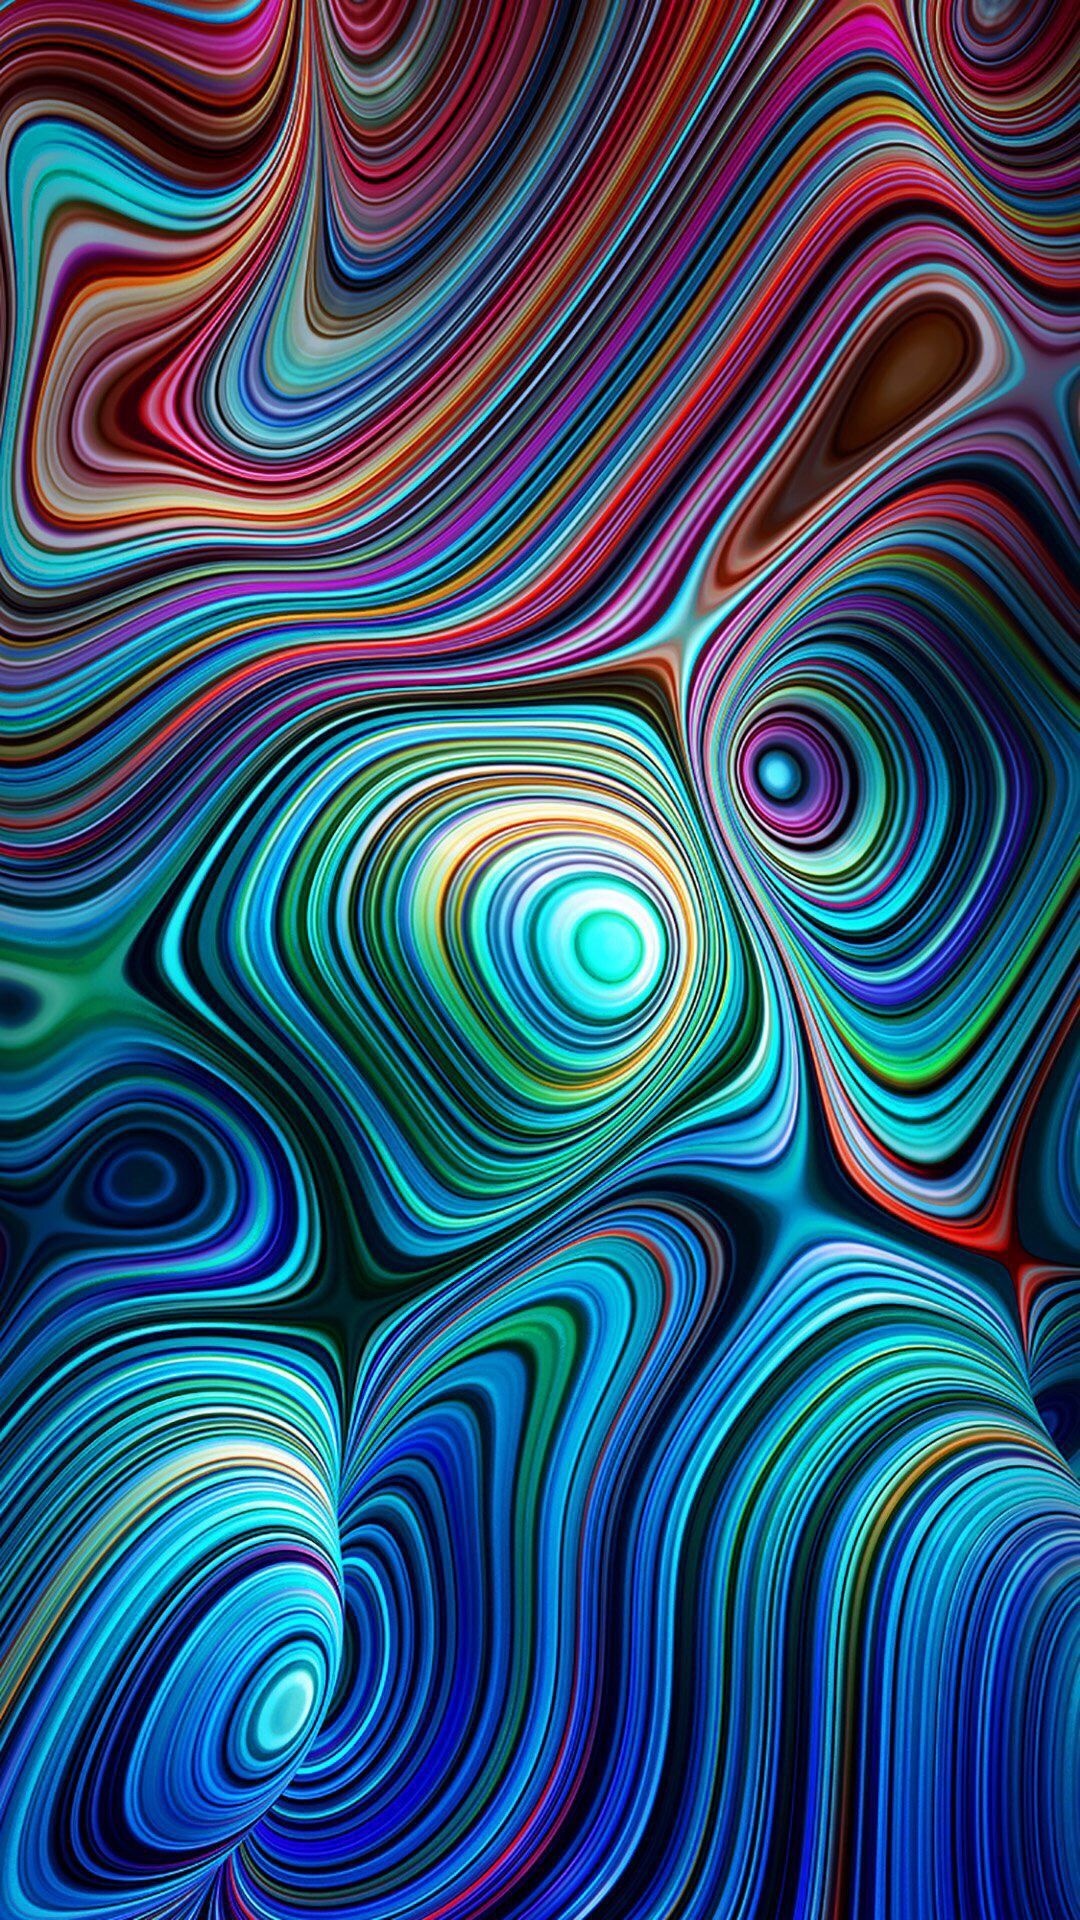 Colorful phone wallpapers, Eye-catching patterns, 1080x1920 Full HD Handy